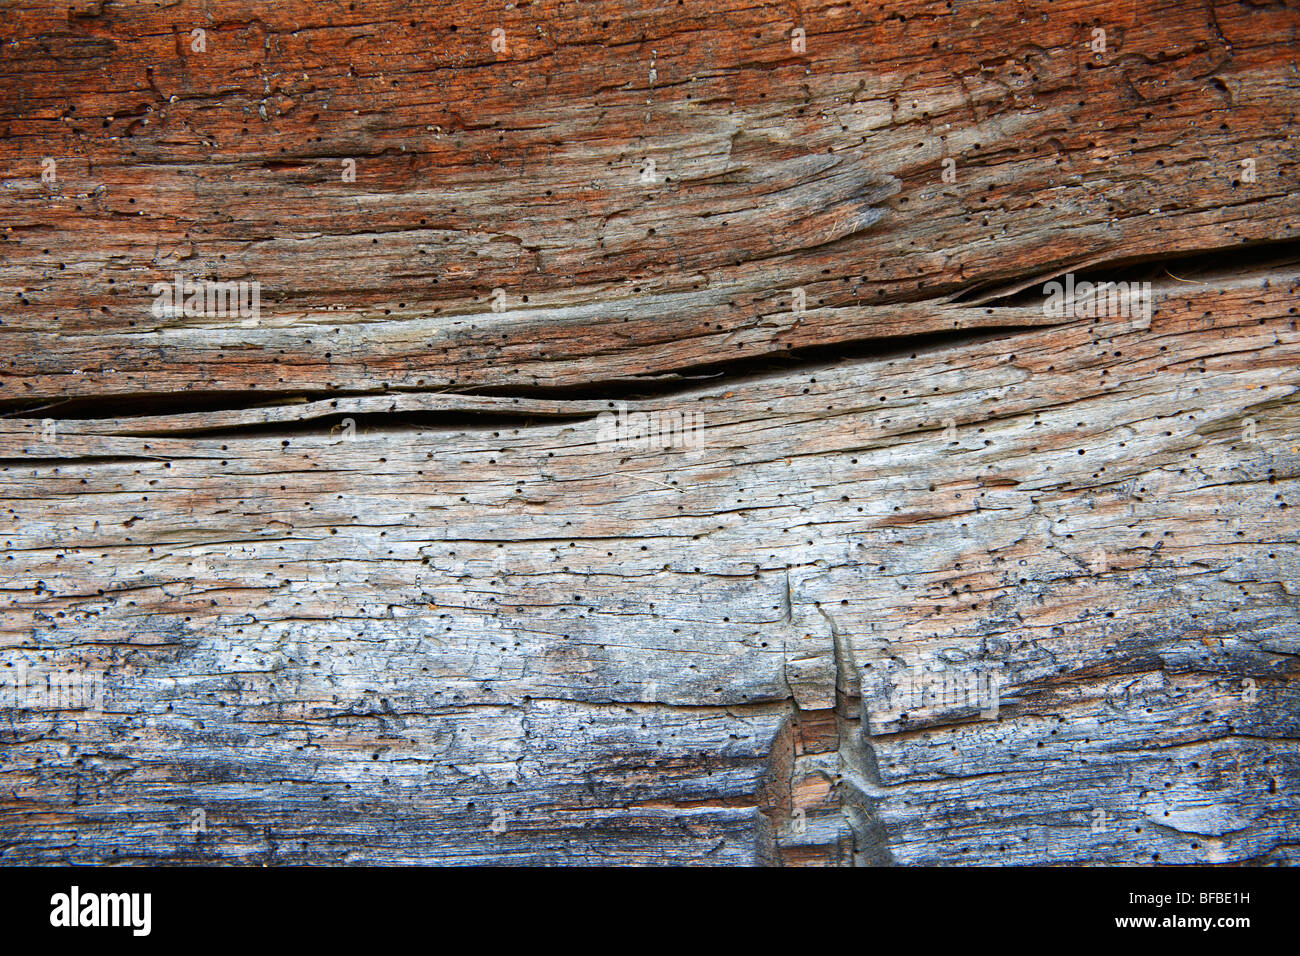 natural textures - old weathered wood texrure Stock Photo